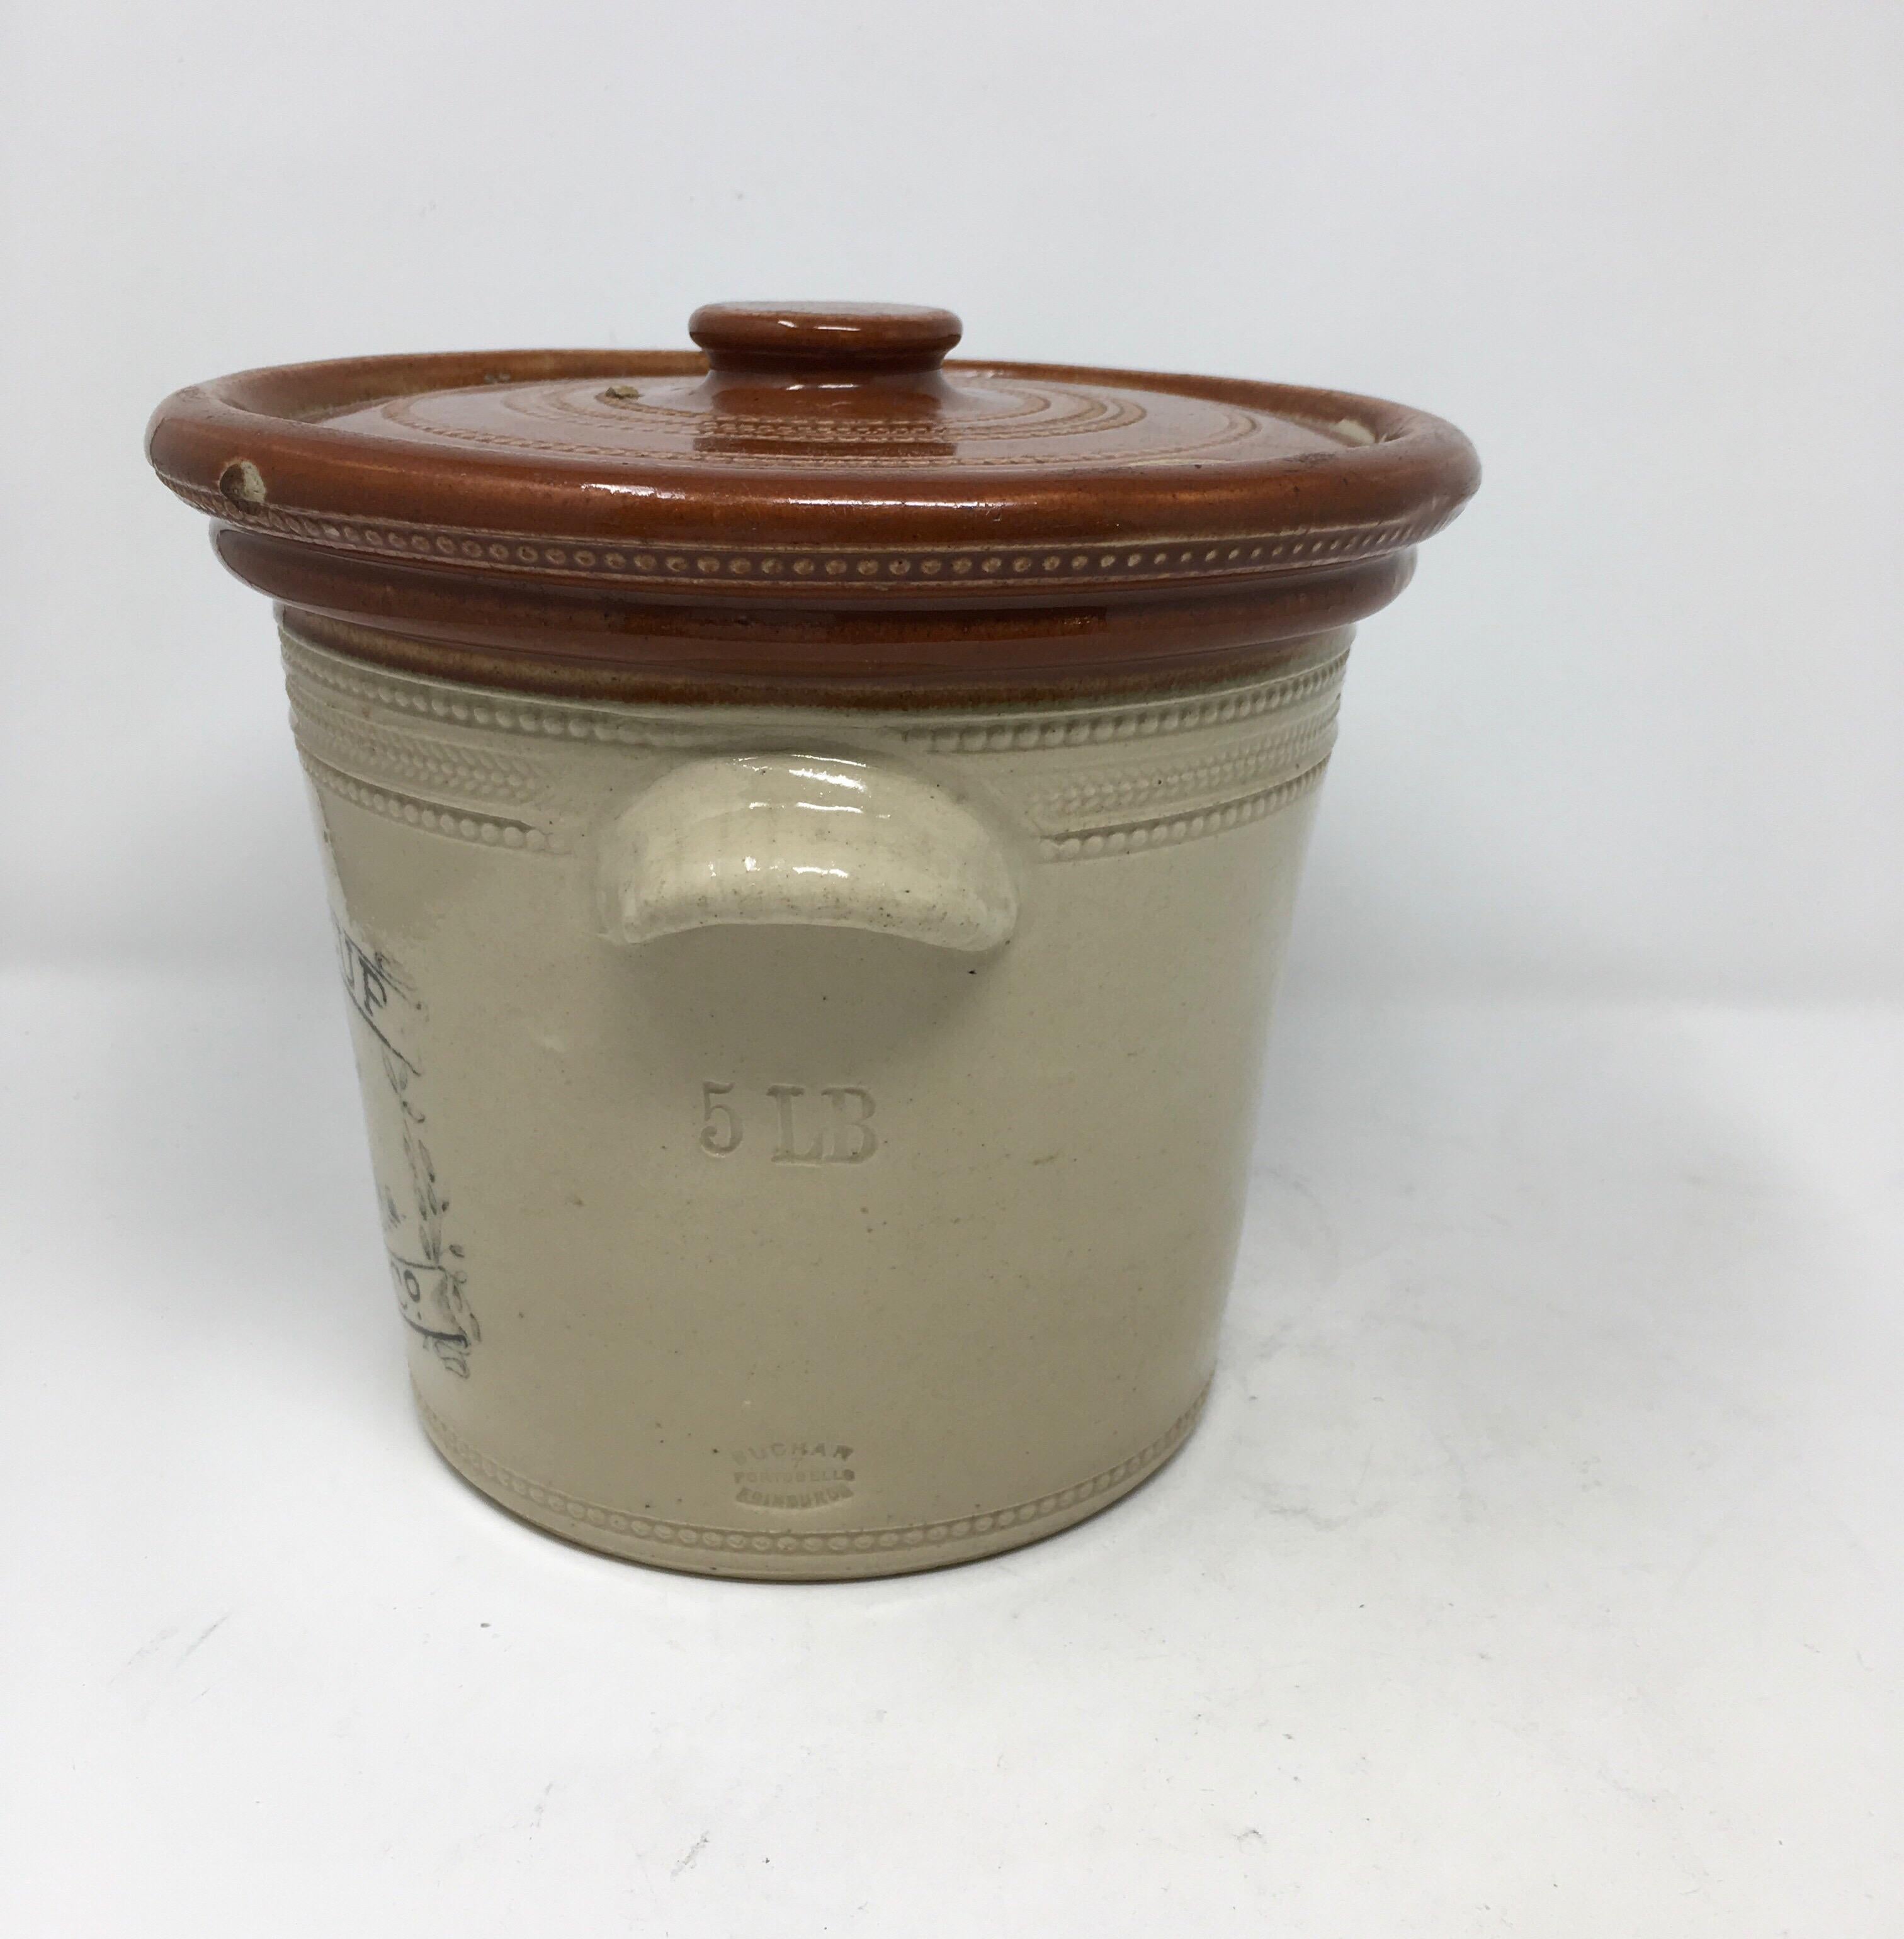 Imported from England, this is a large 5lb. circa 1920 Scottish printed advertising butter crock. The transfer printed butter crock with a pictorial of a dairy cow is from Buttercup Dairy Co. and is marked Buchan Portebello Pottery in Edinburg.